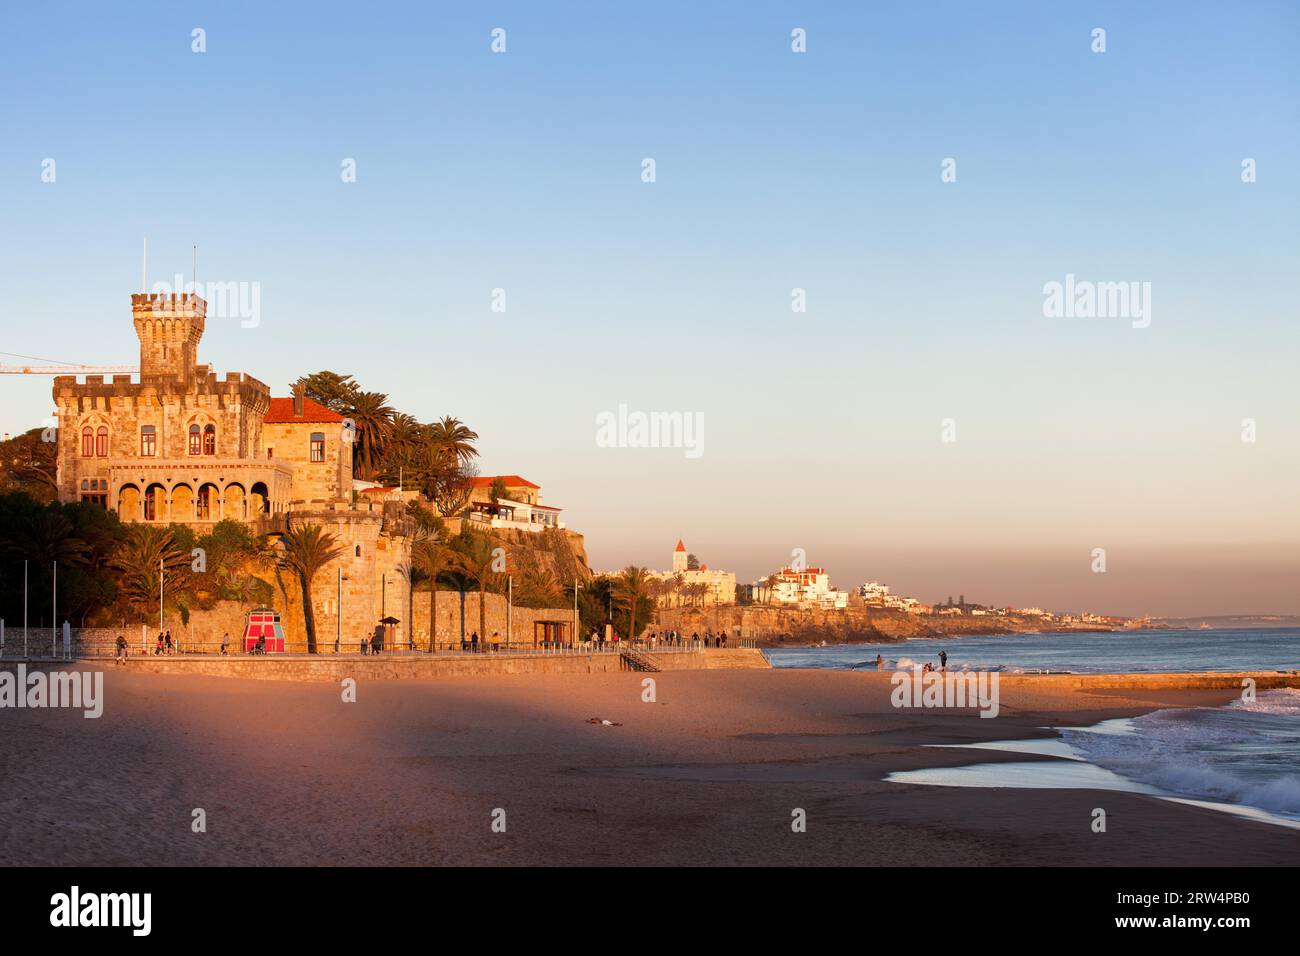 Tranquil scenery by the Atlantic Ocean, Tamariz Beach overlooked by a castle at sunset in resort town of Estoril in Portugal Stock Photo